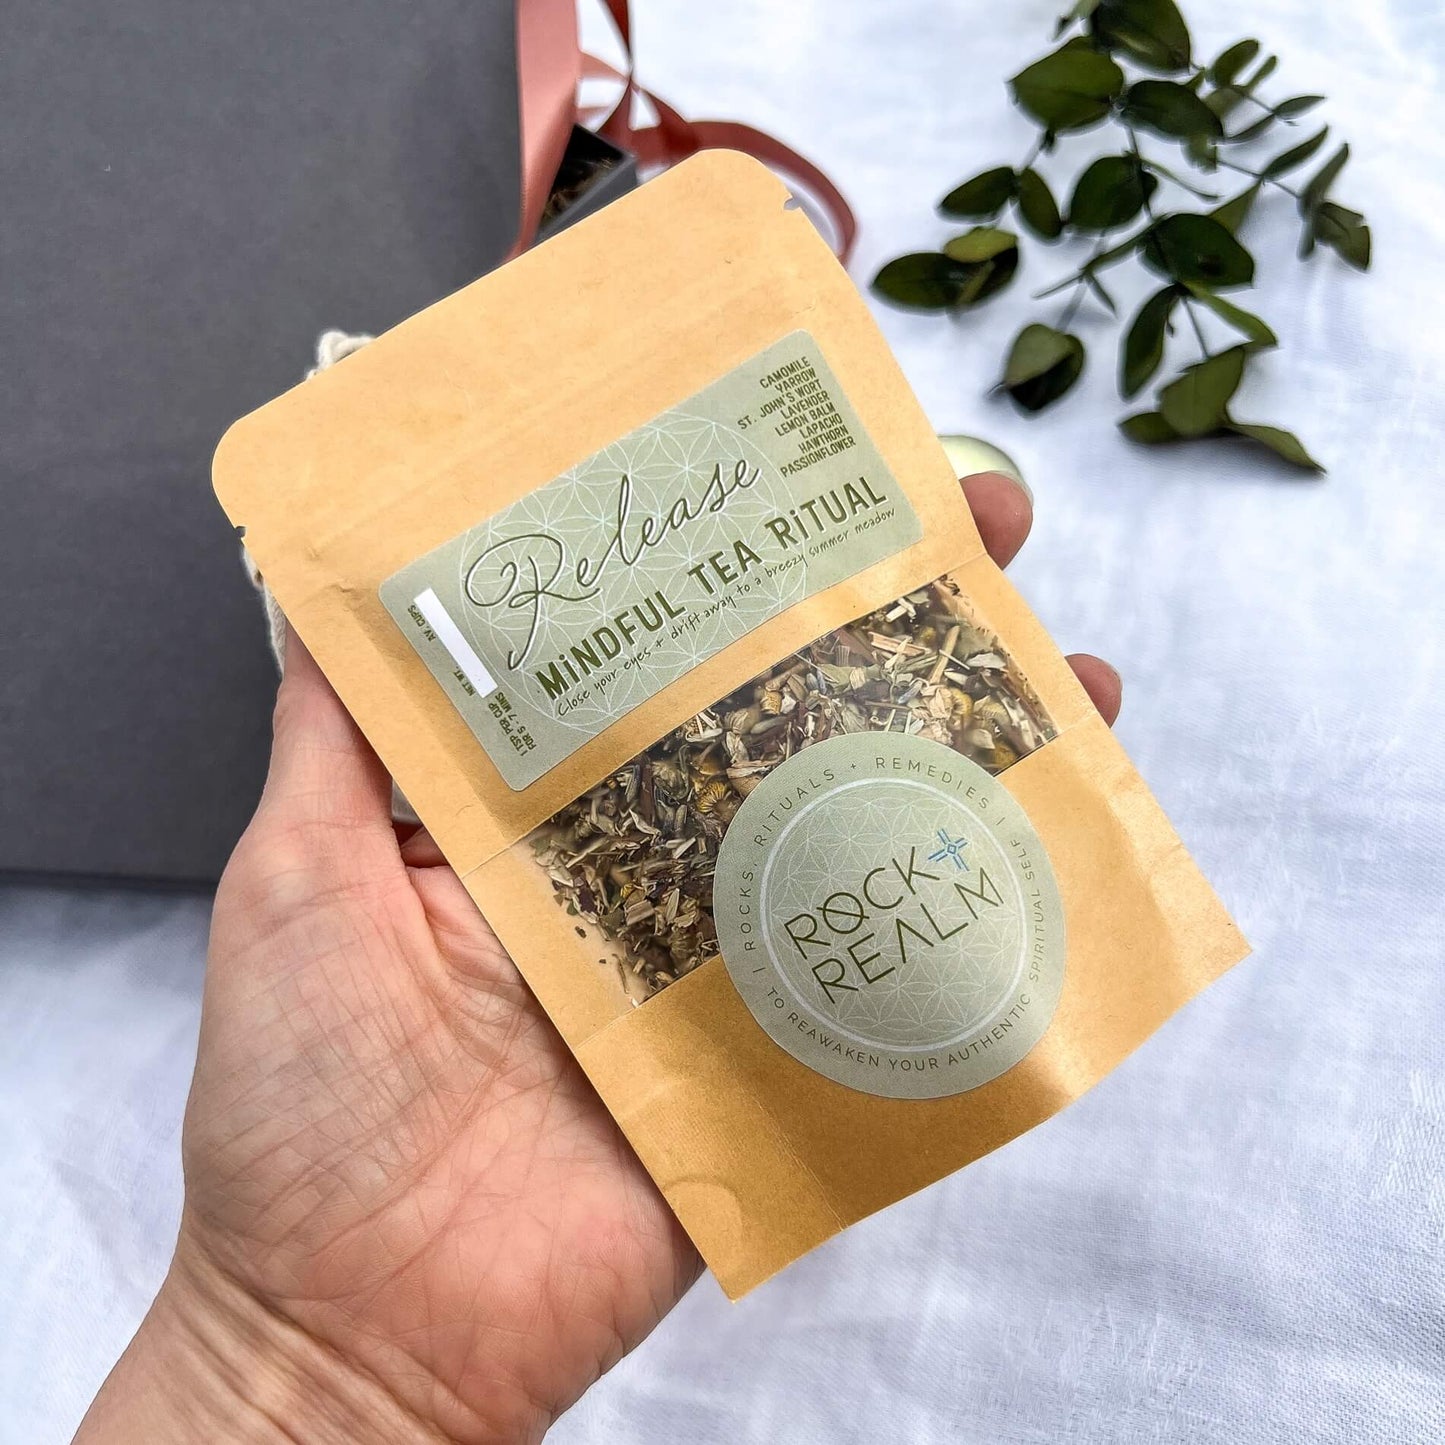 REVIVE Wellbeing Ritual Gift Box